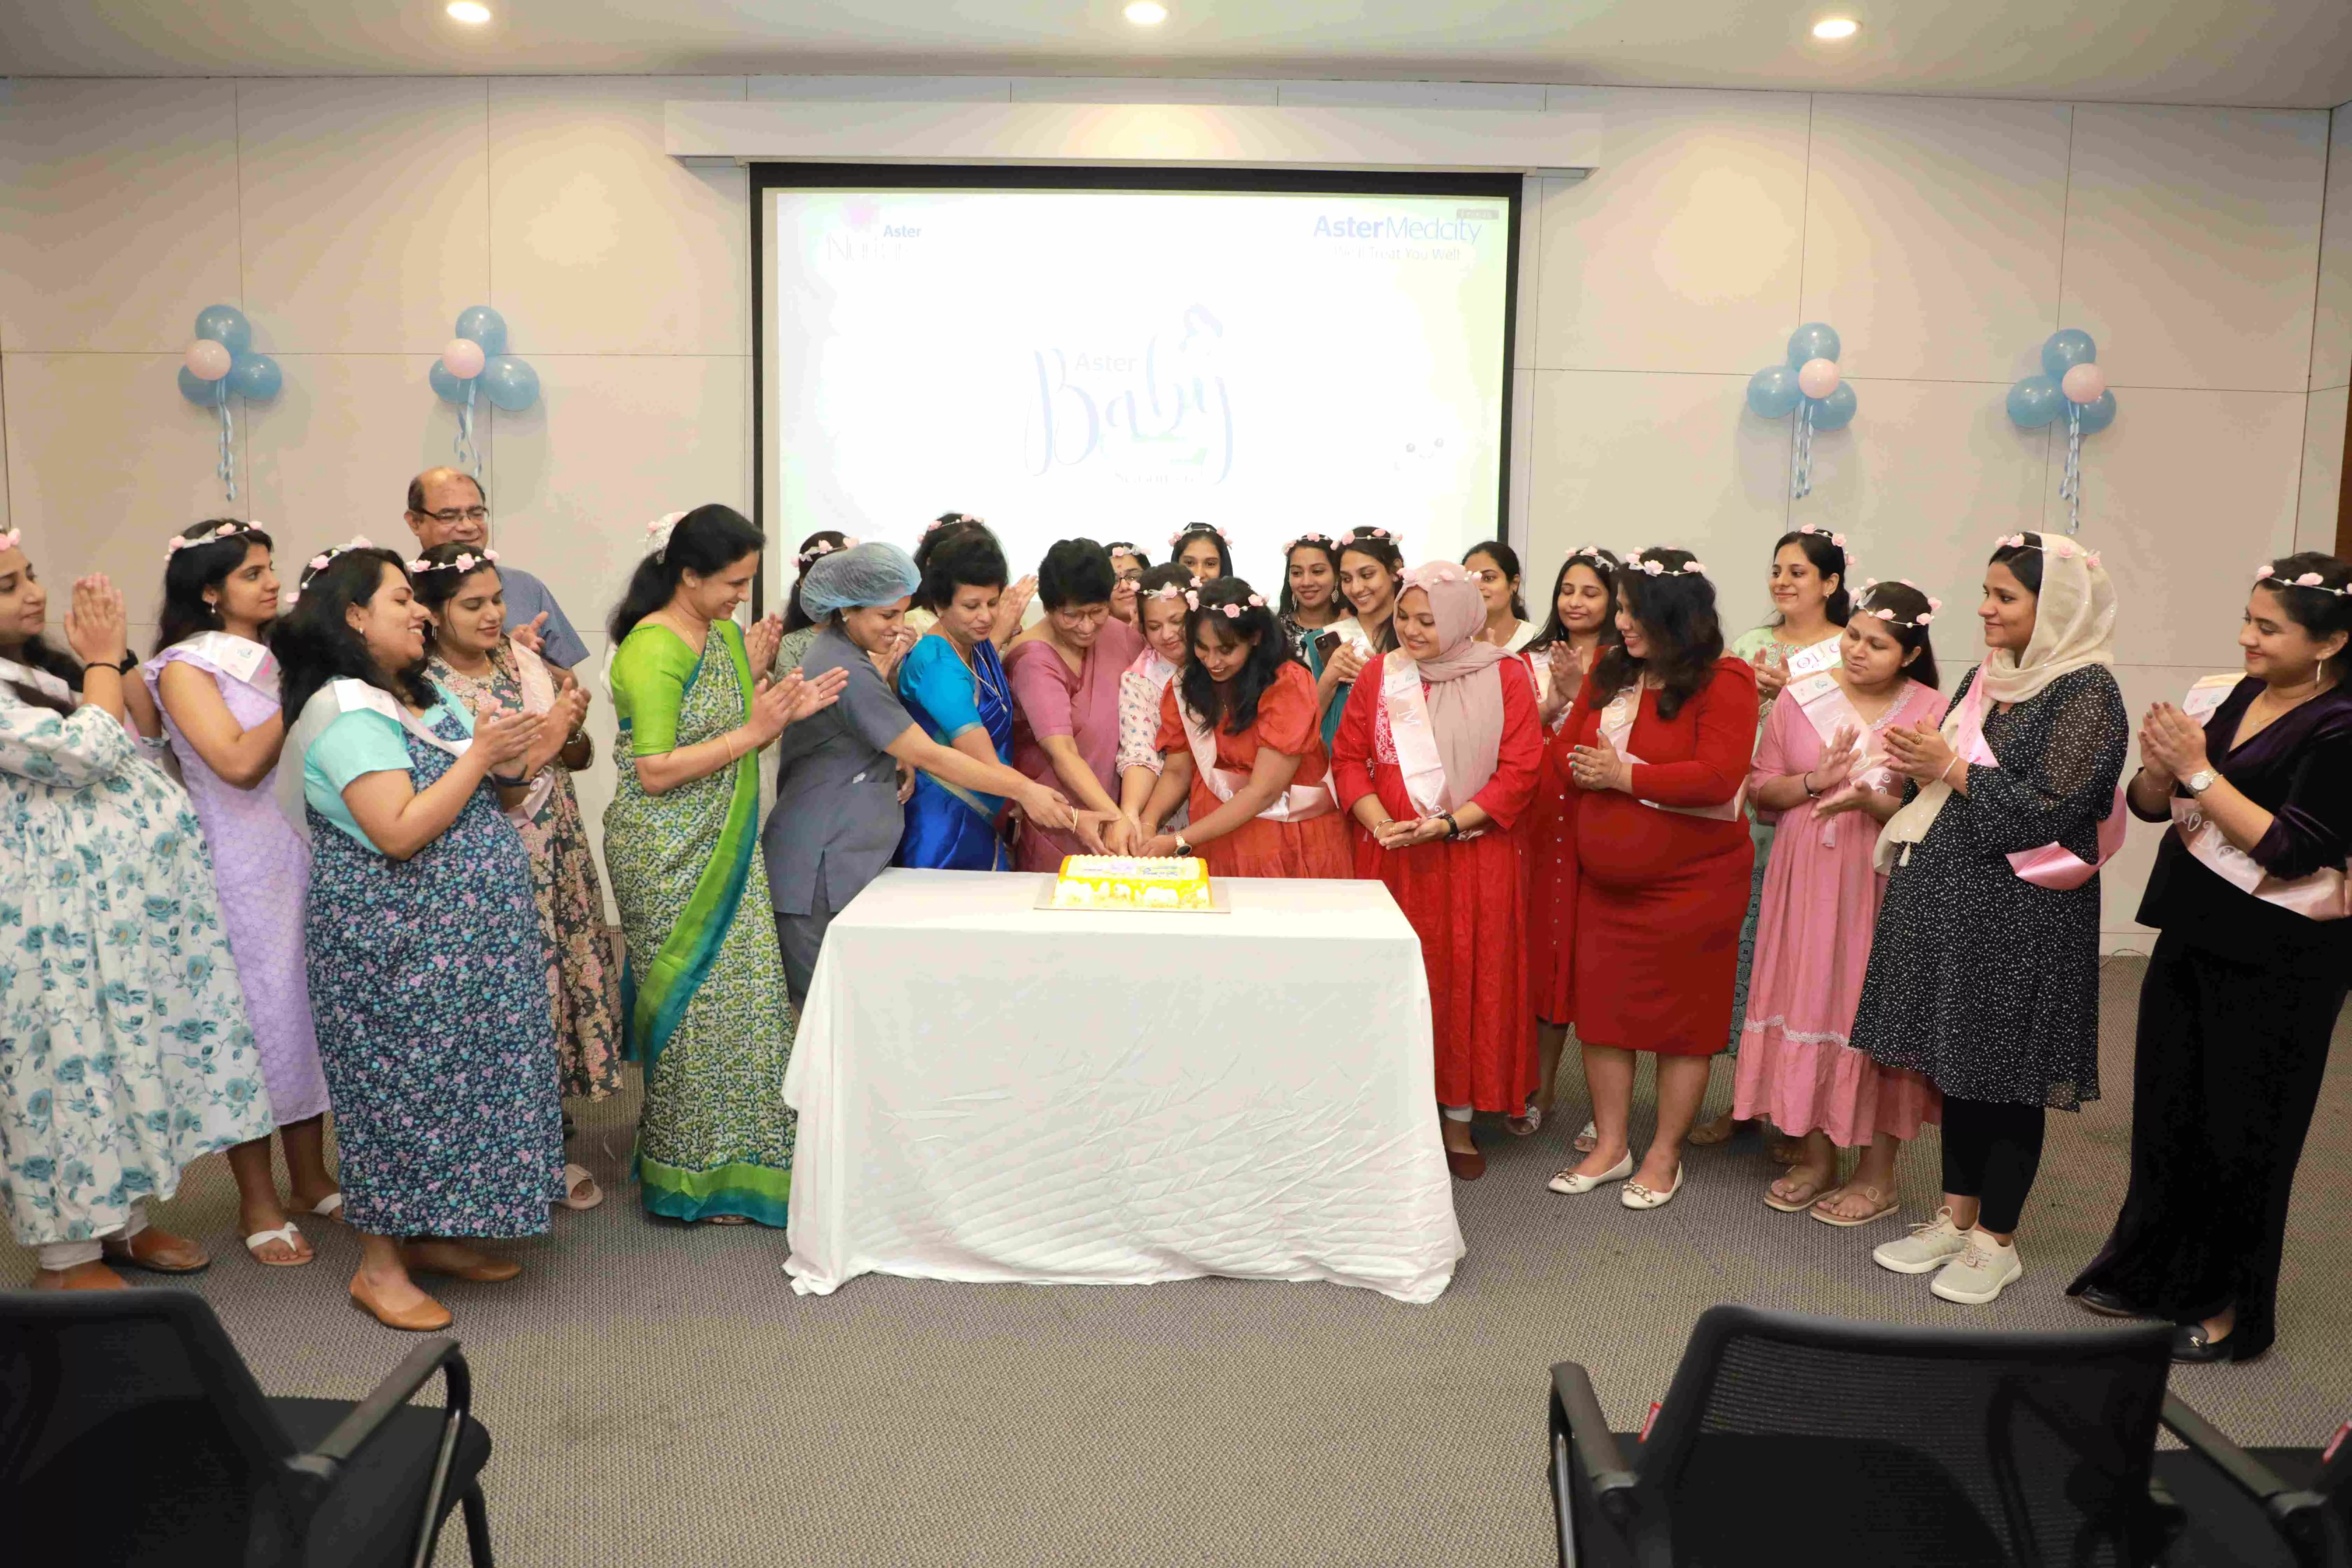 "Aster Medcity's Heartfelt Celebration: Honoring Expecting Moms with a Joyous Baby Shower